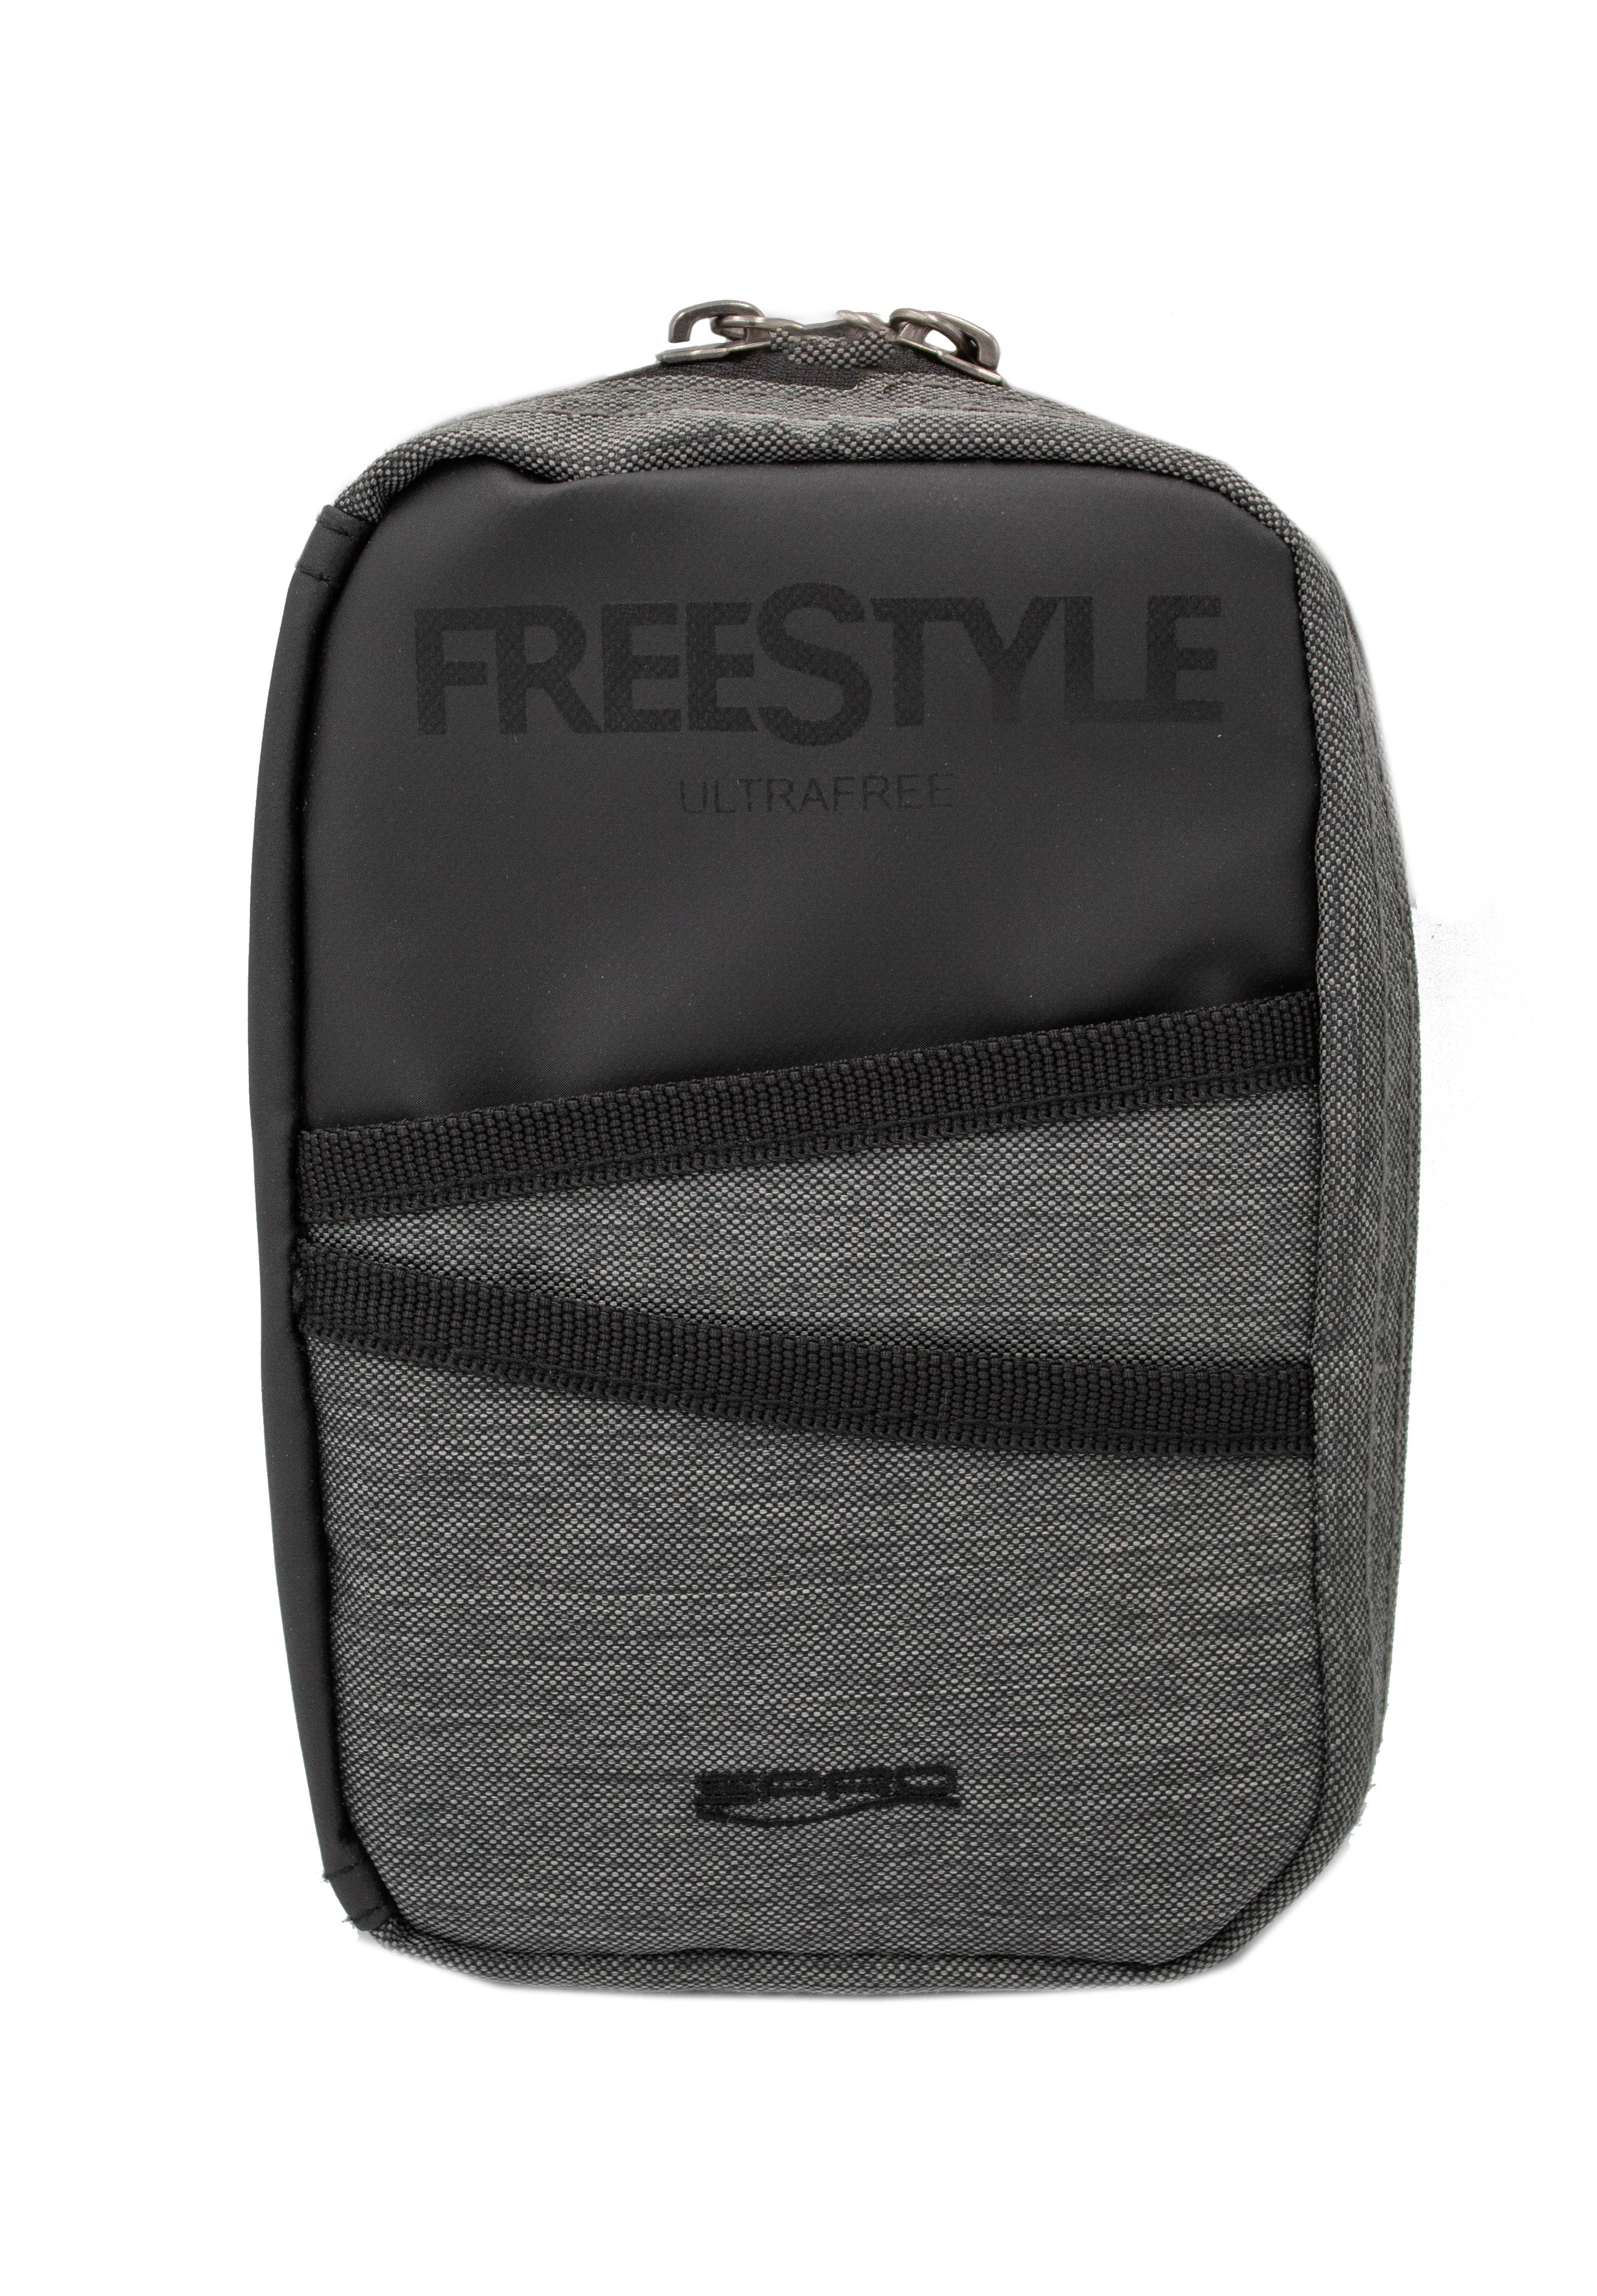 Сумка SPRO Freestyle Ultrafree lure pouch - фото 1